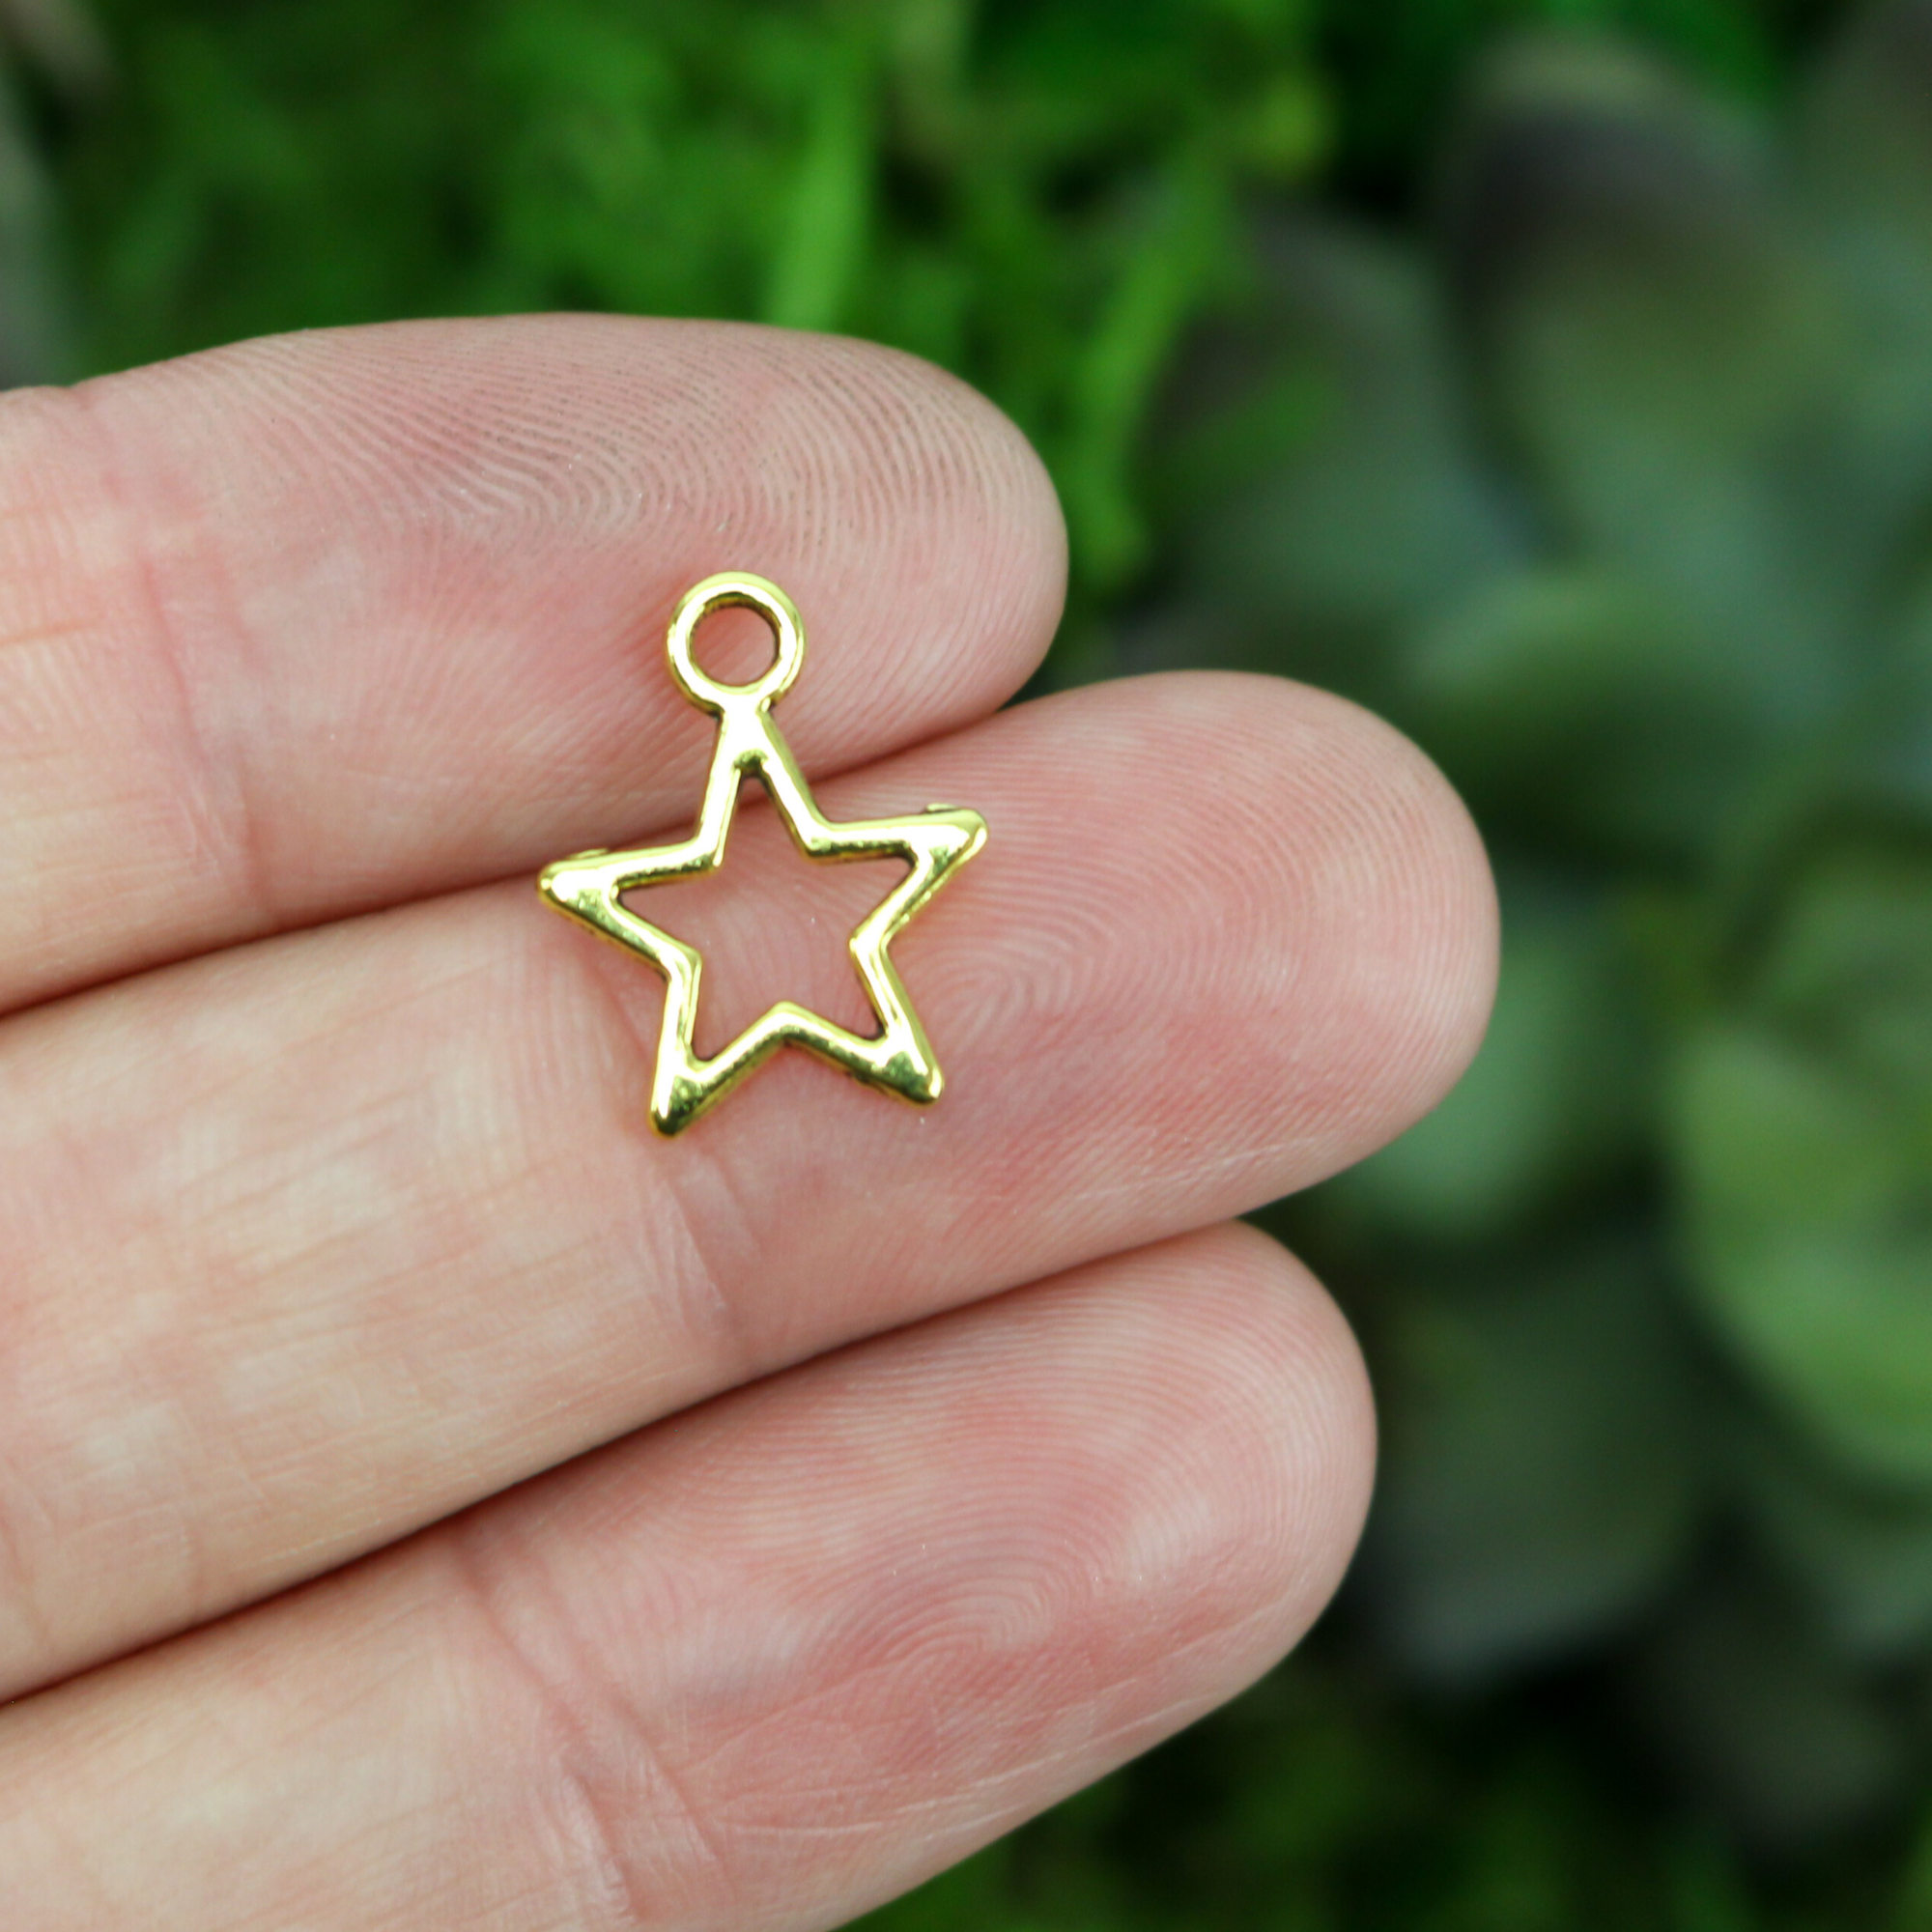 gold-tone small star shaped charm with cutout hollow design